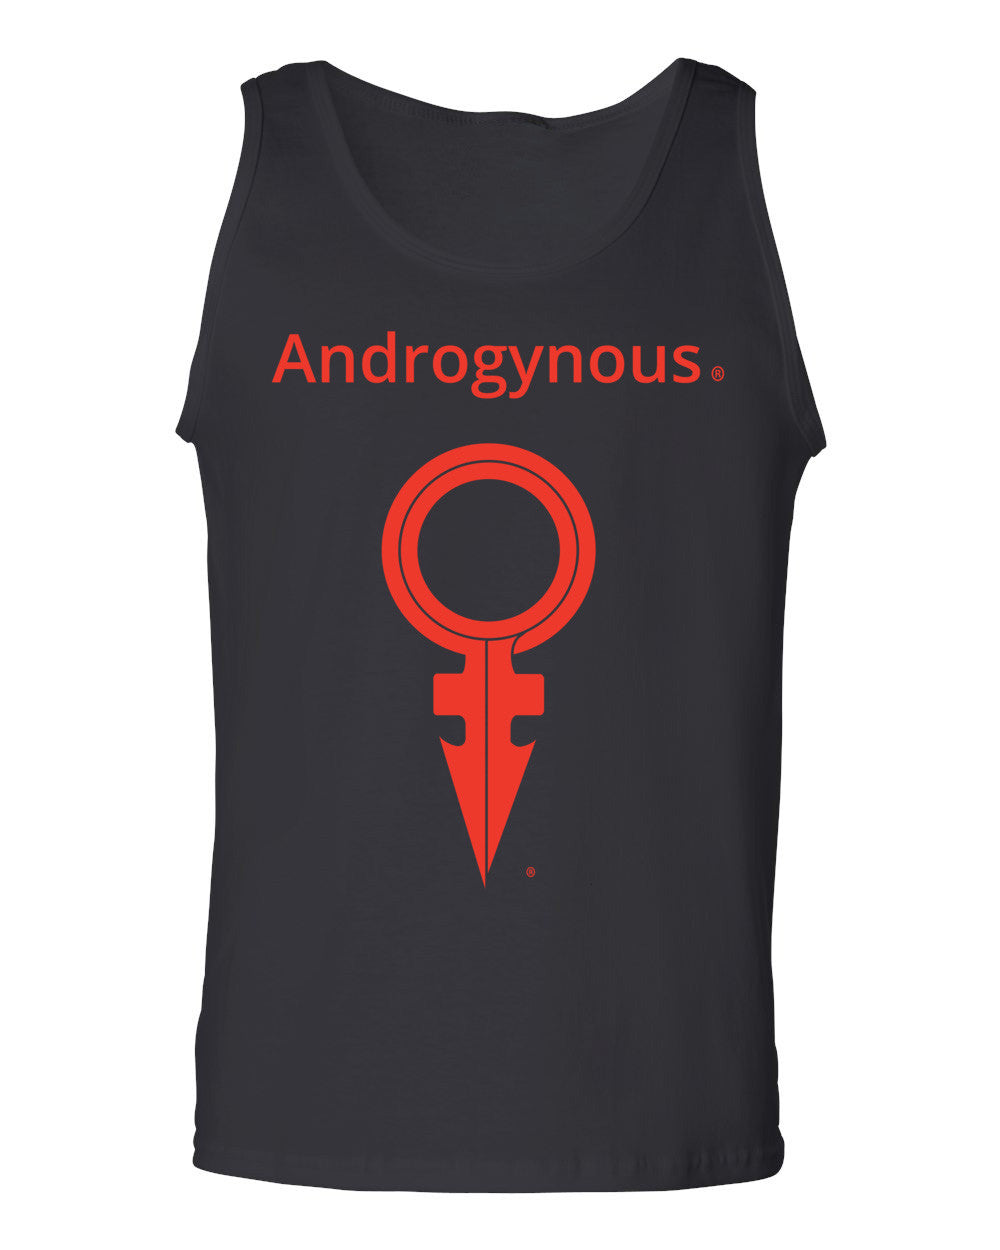 ANDROGYNOUS + SYMBOL RED ON BLACK PRINTED COTTON –T-SHIRT